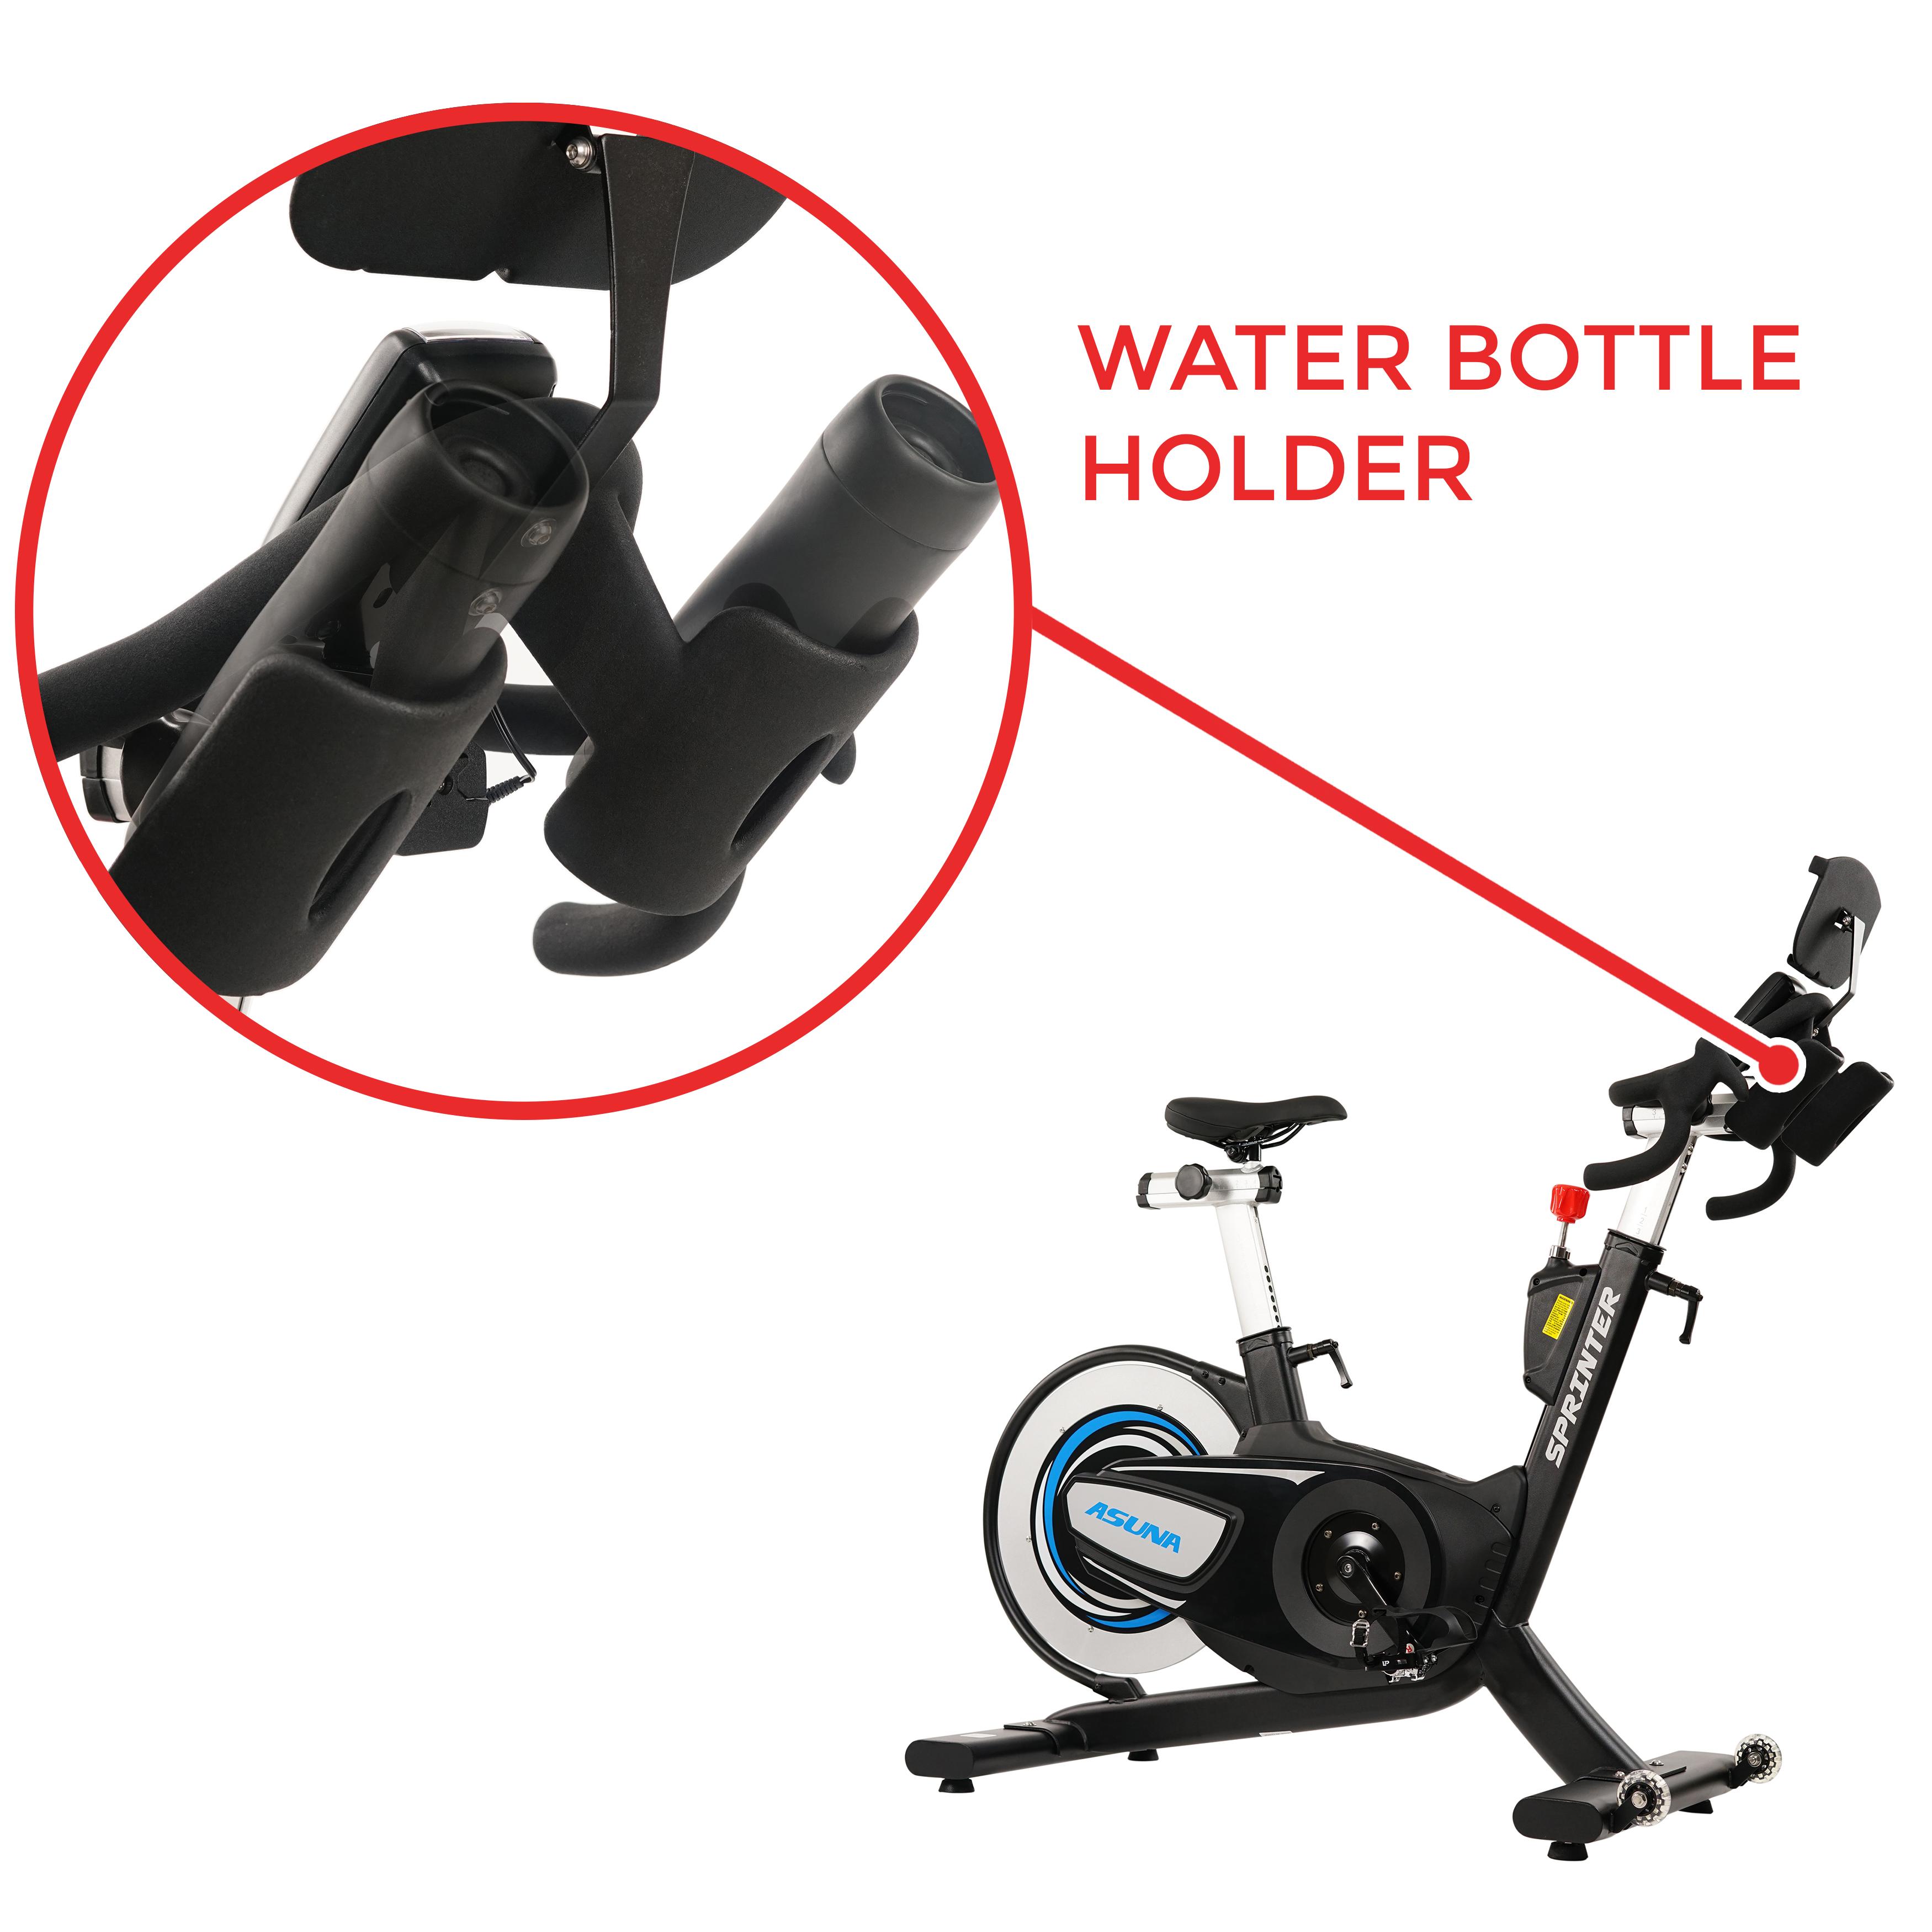 Closeup of water bottle holders on an exercise bike.